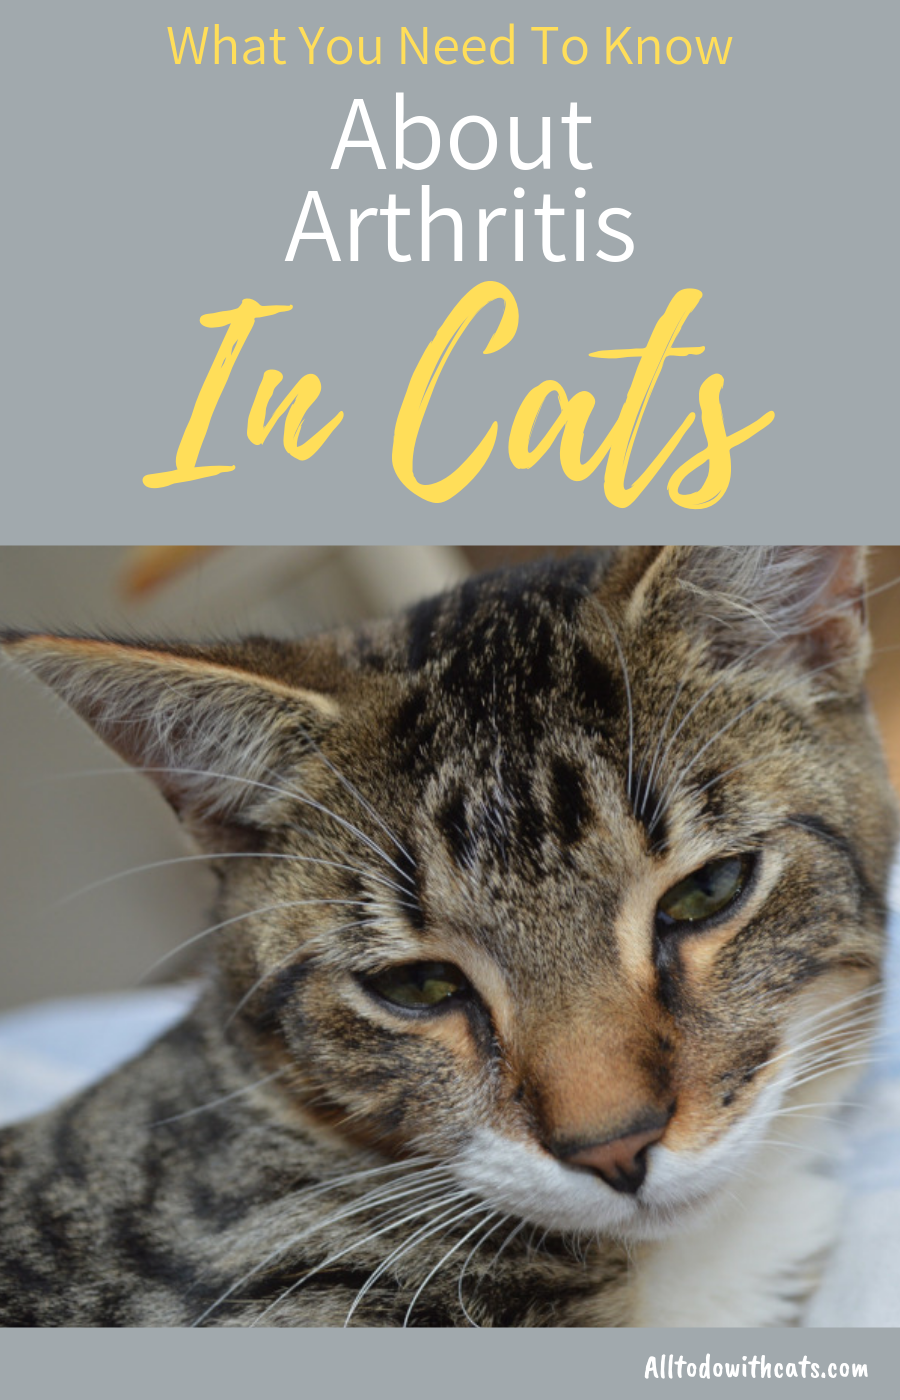 What Is Arthritis In Cats? (What You Need To Know)